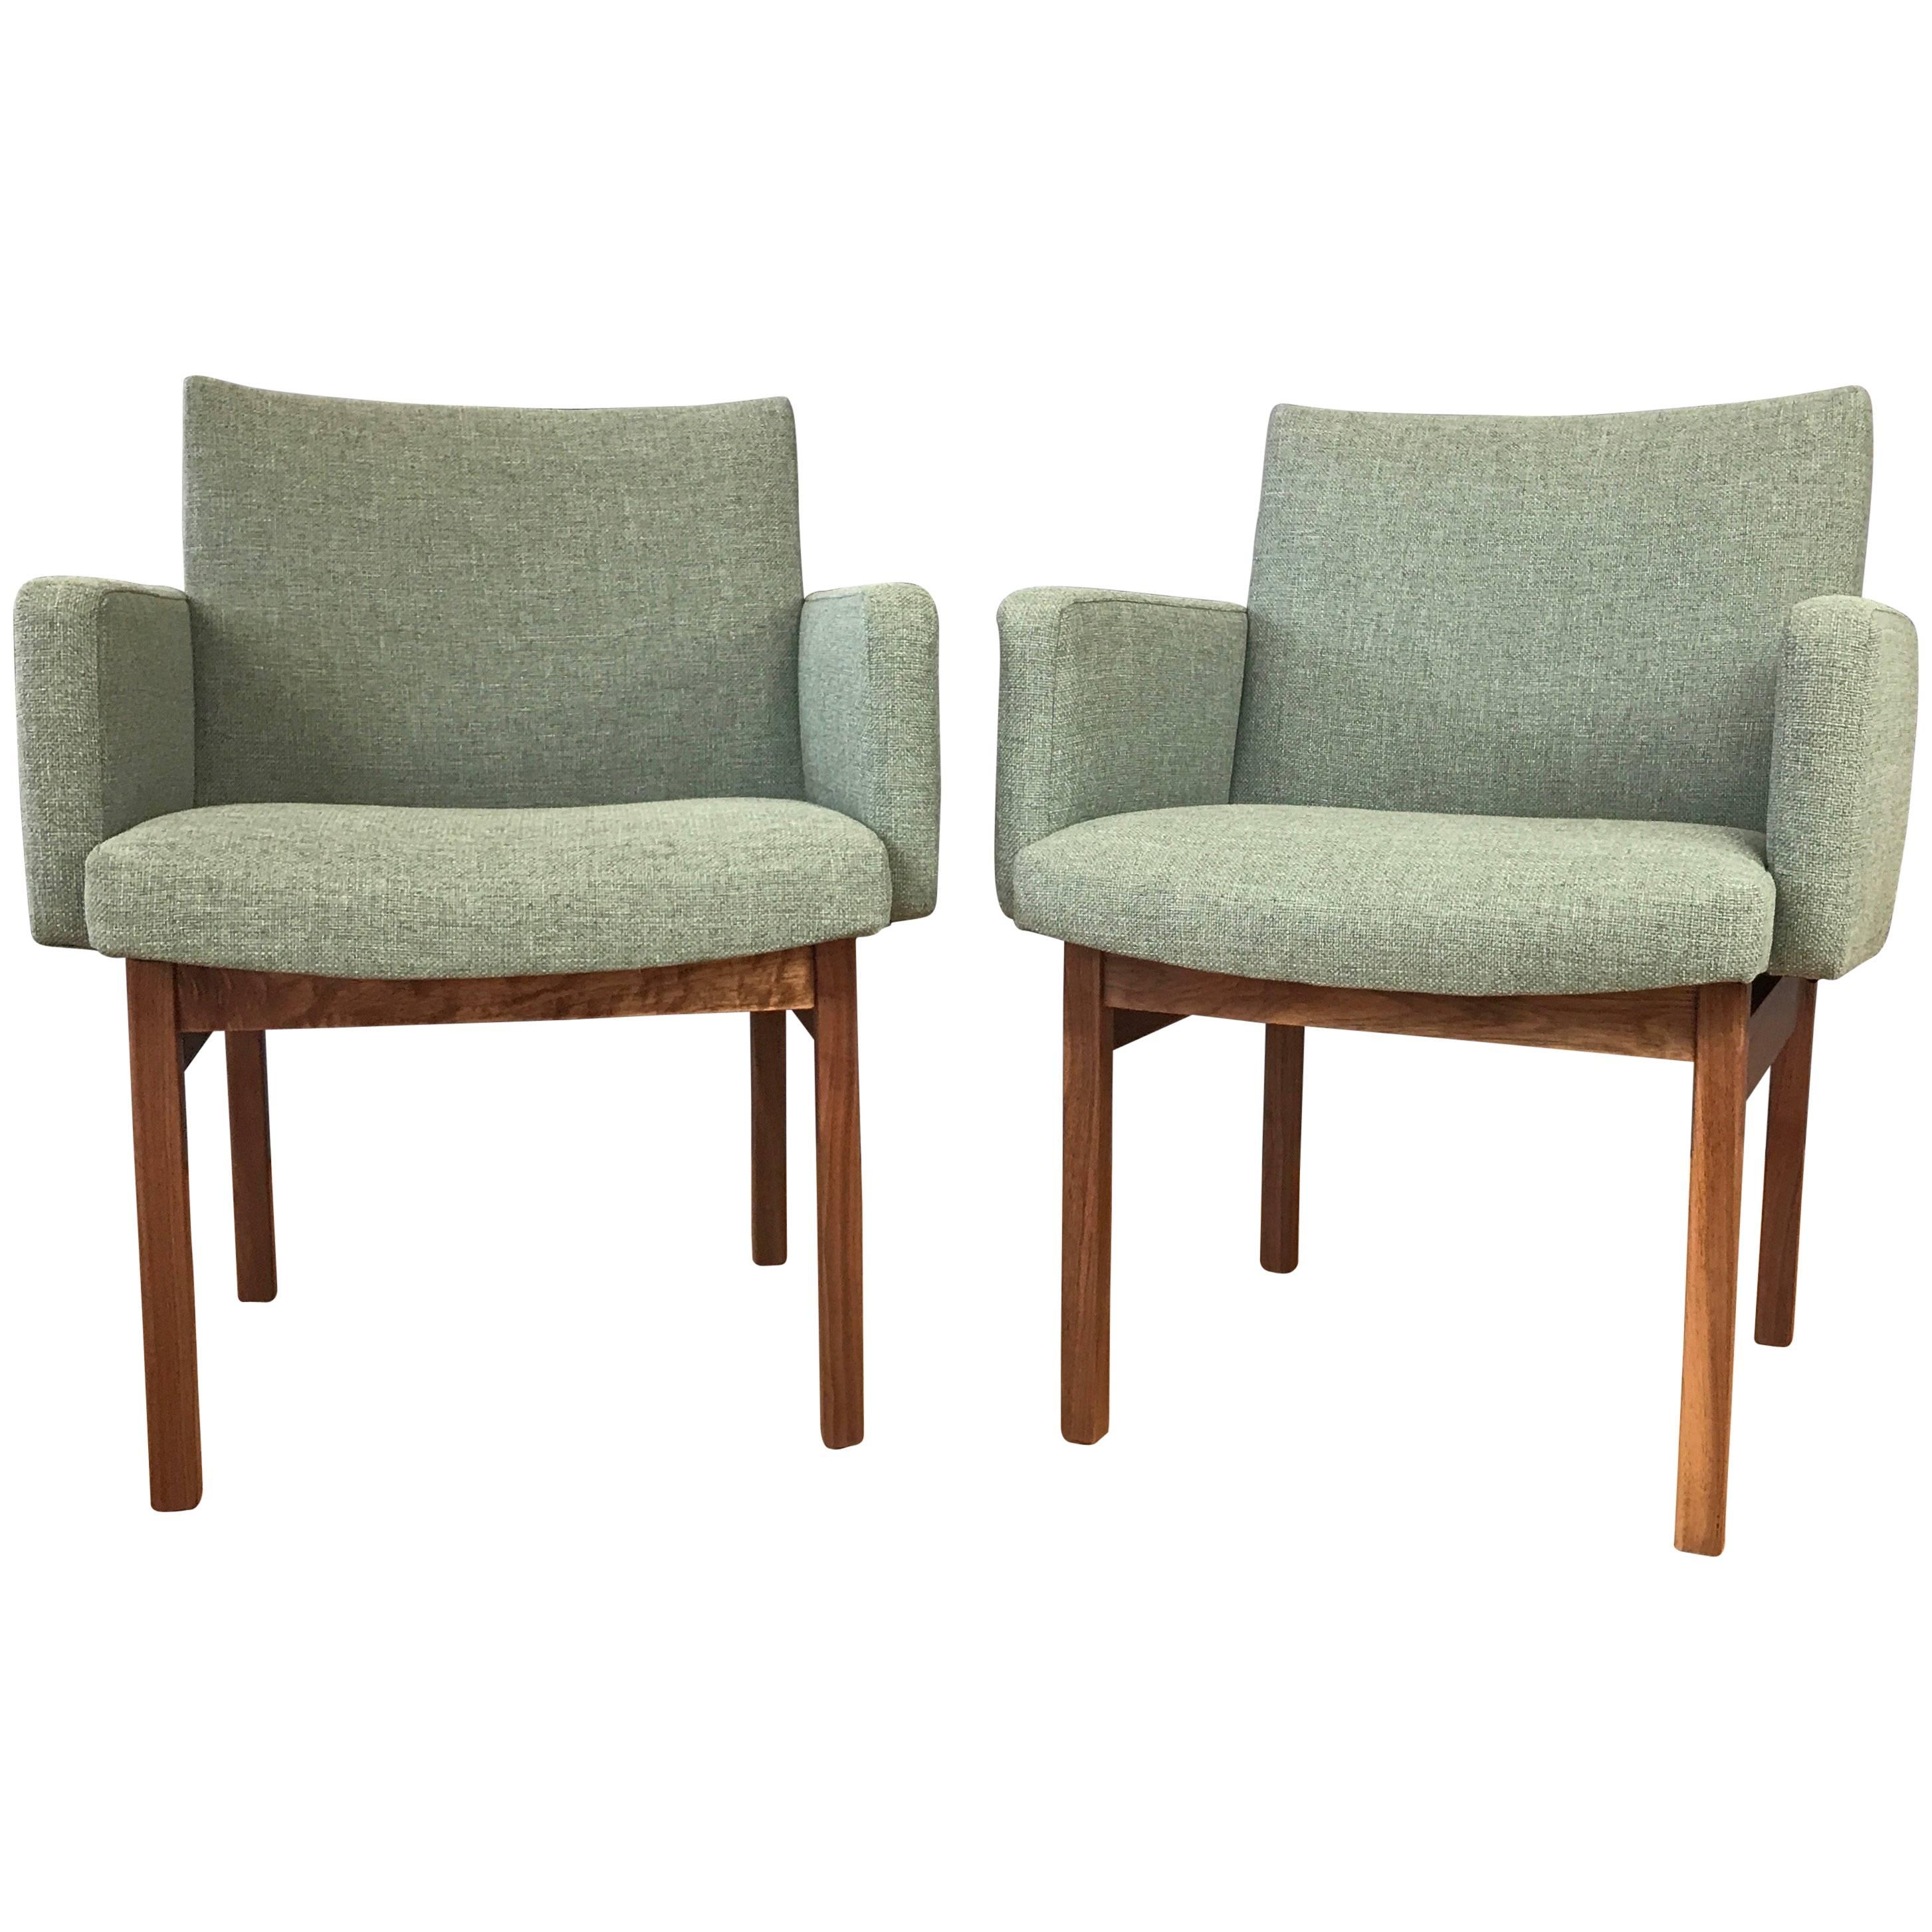 Pair of Midcentury Walnut Lounge Chairs Attributed to Jens Risom